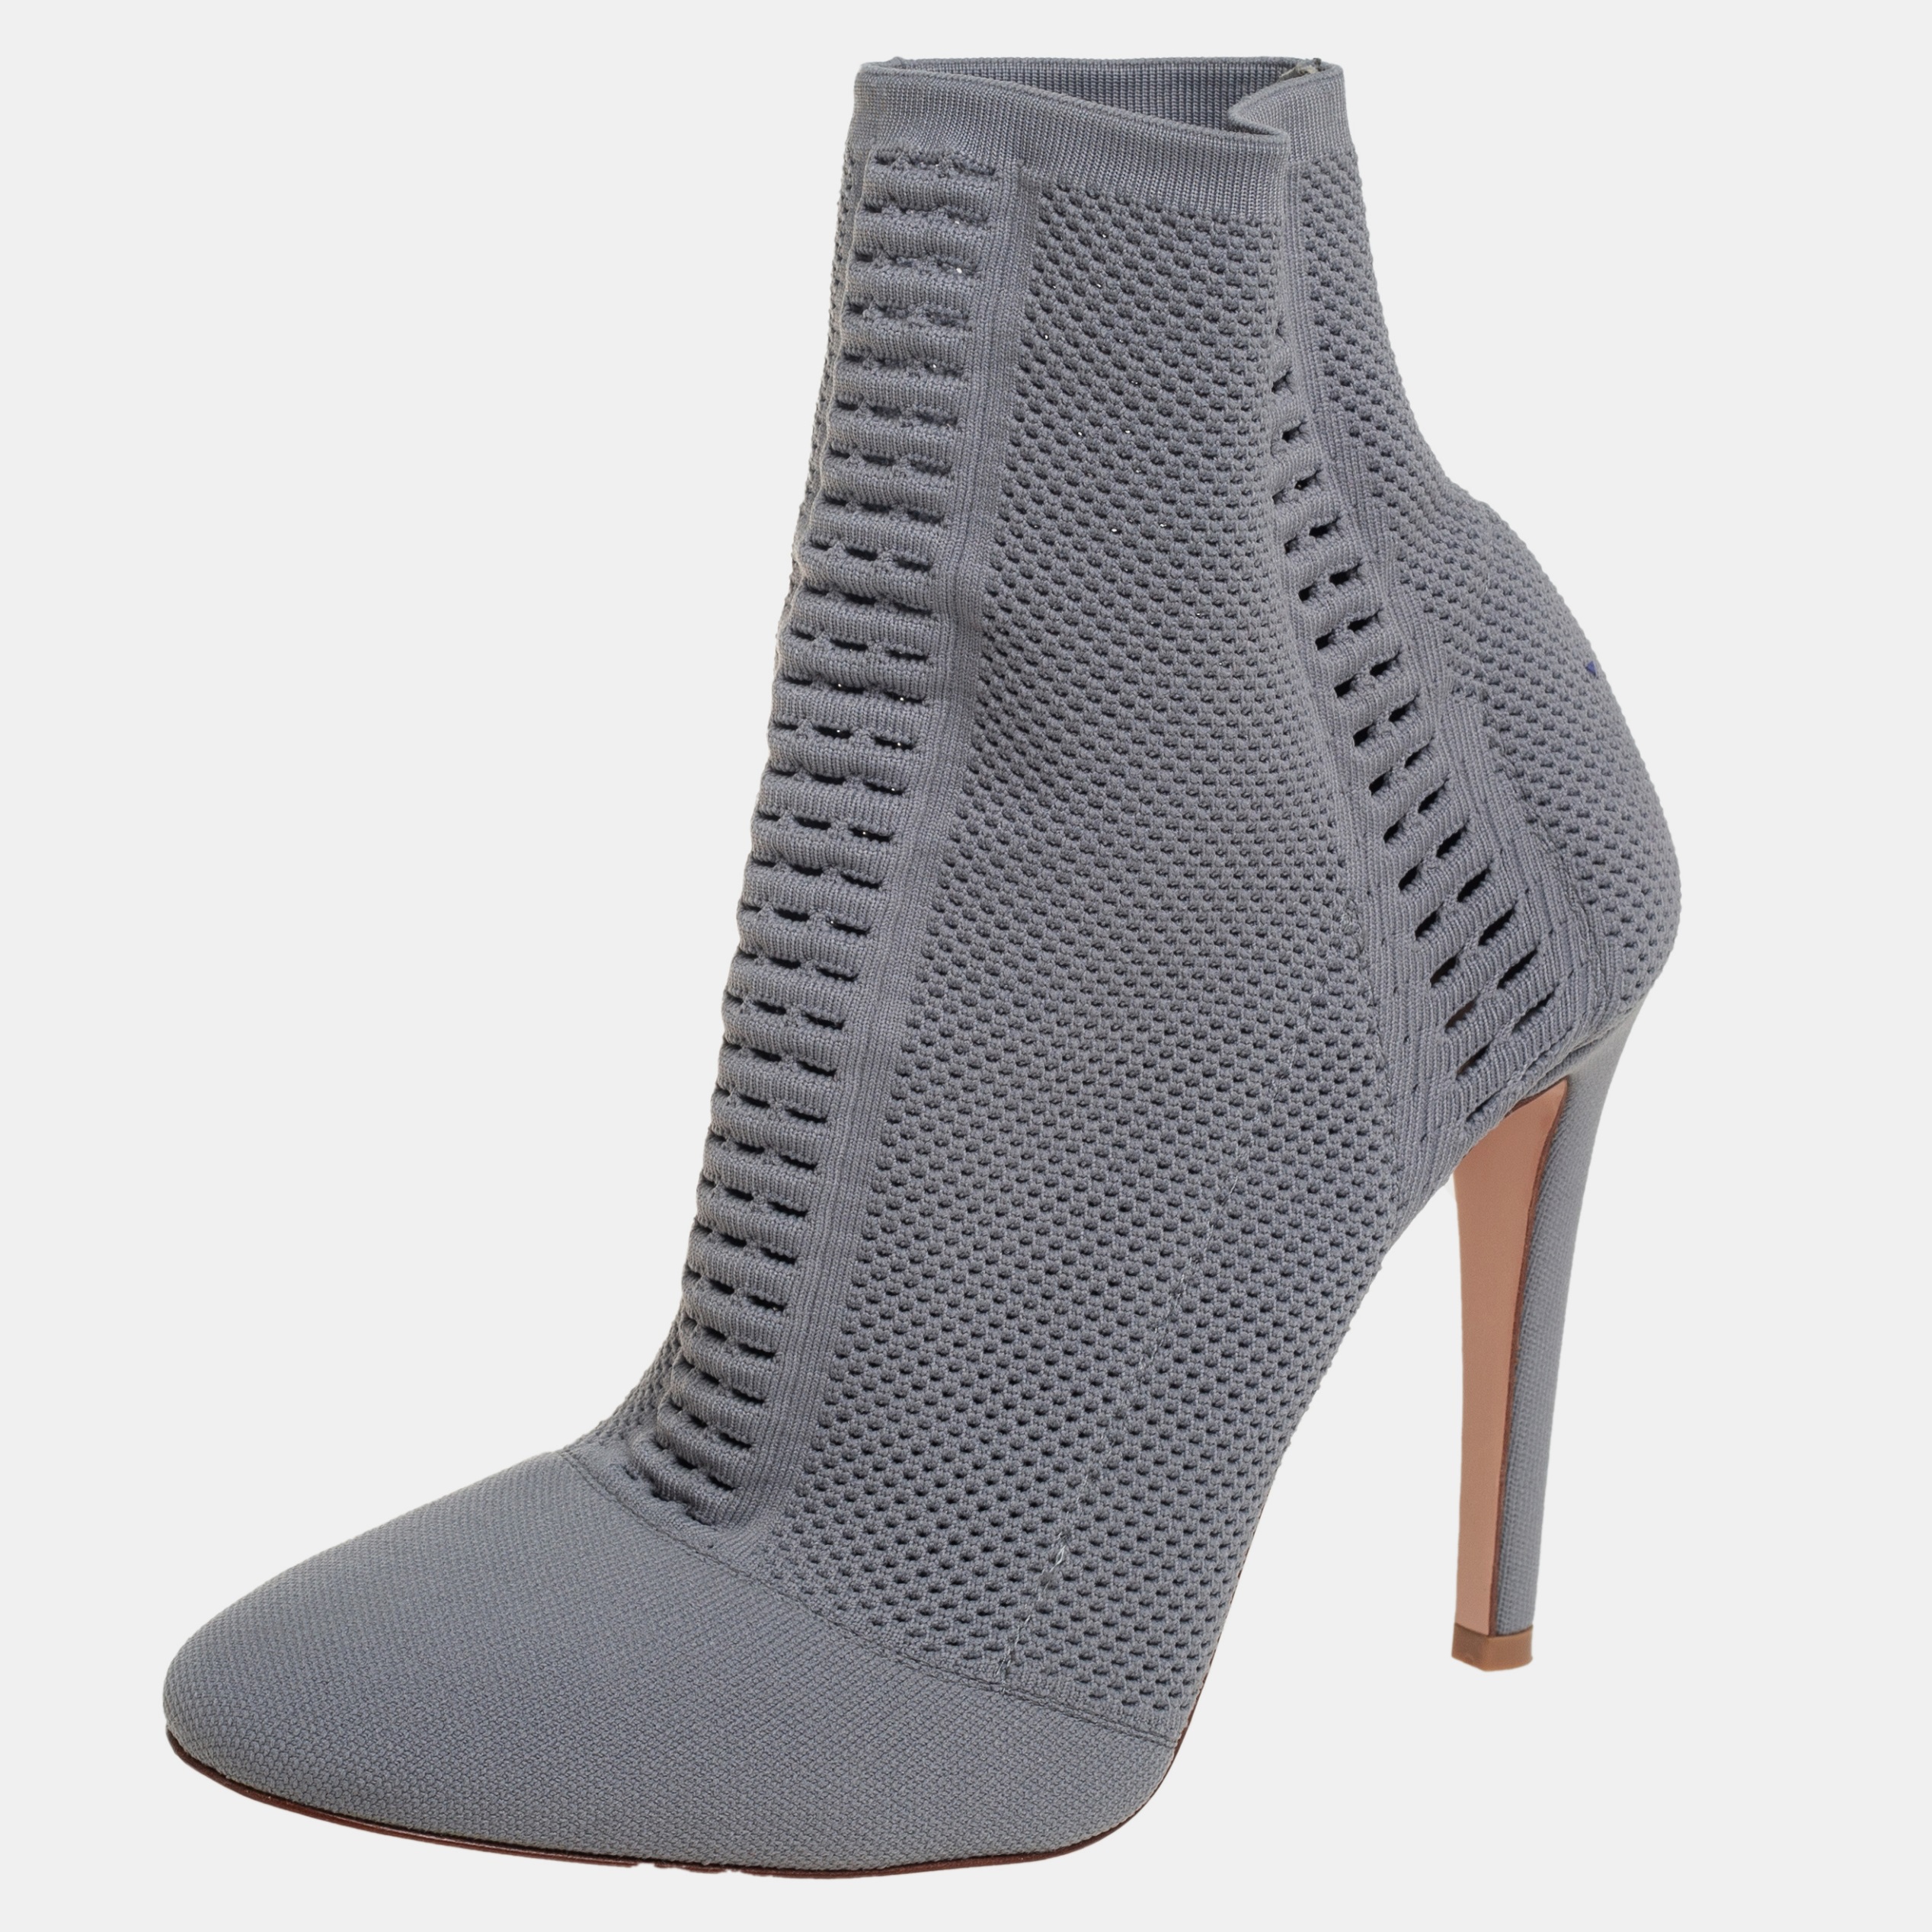 Gianvito rossi grey stretch knit thurlow ankle boots size 39